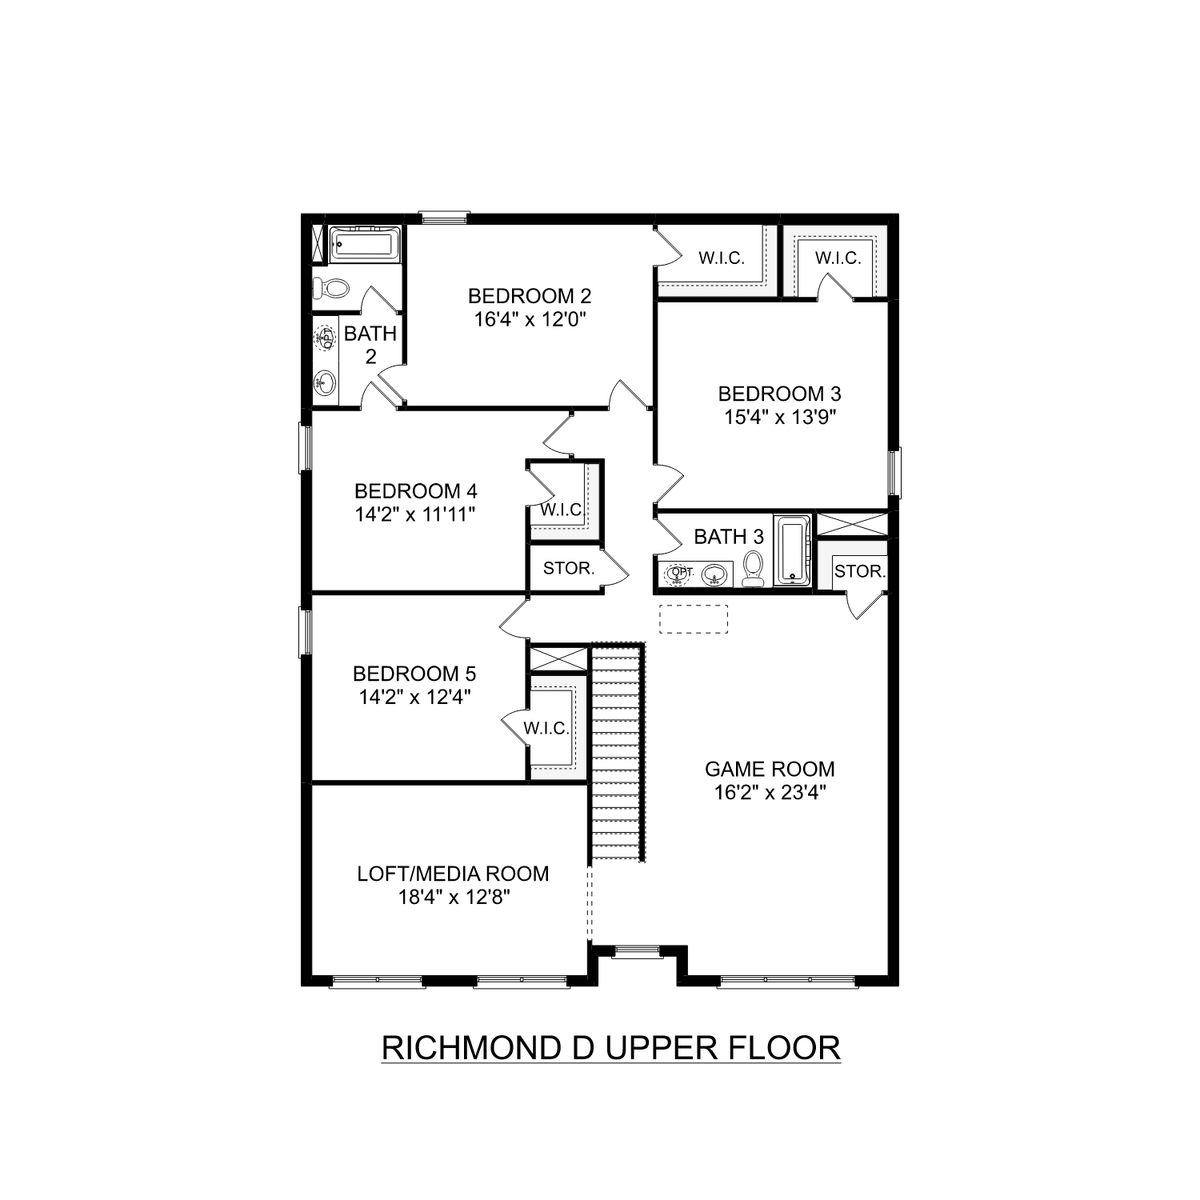 2 - The Richmond D floor plan layout for 104 Shearwater Drive in Davidson Homes' Walker's Hill community.